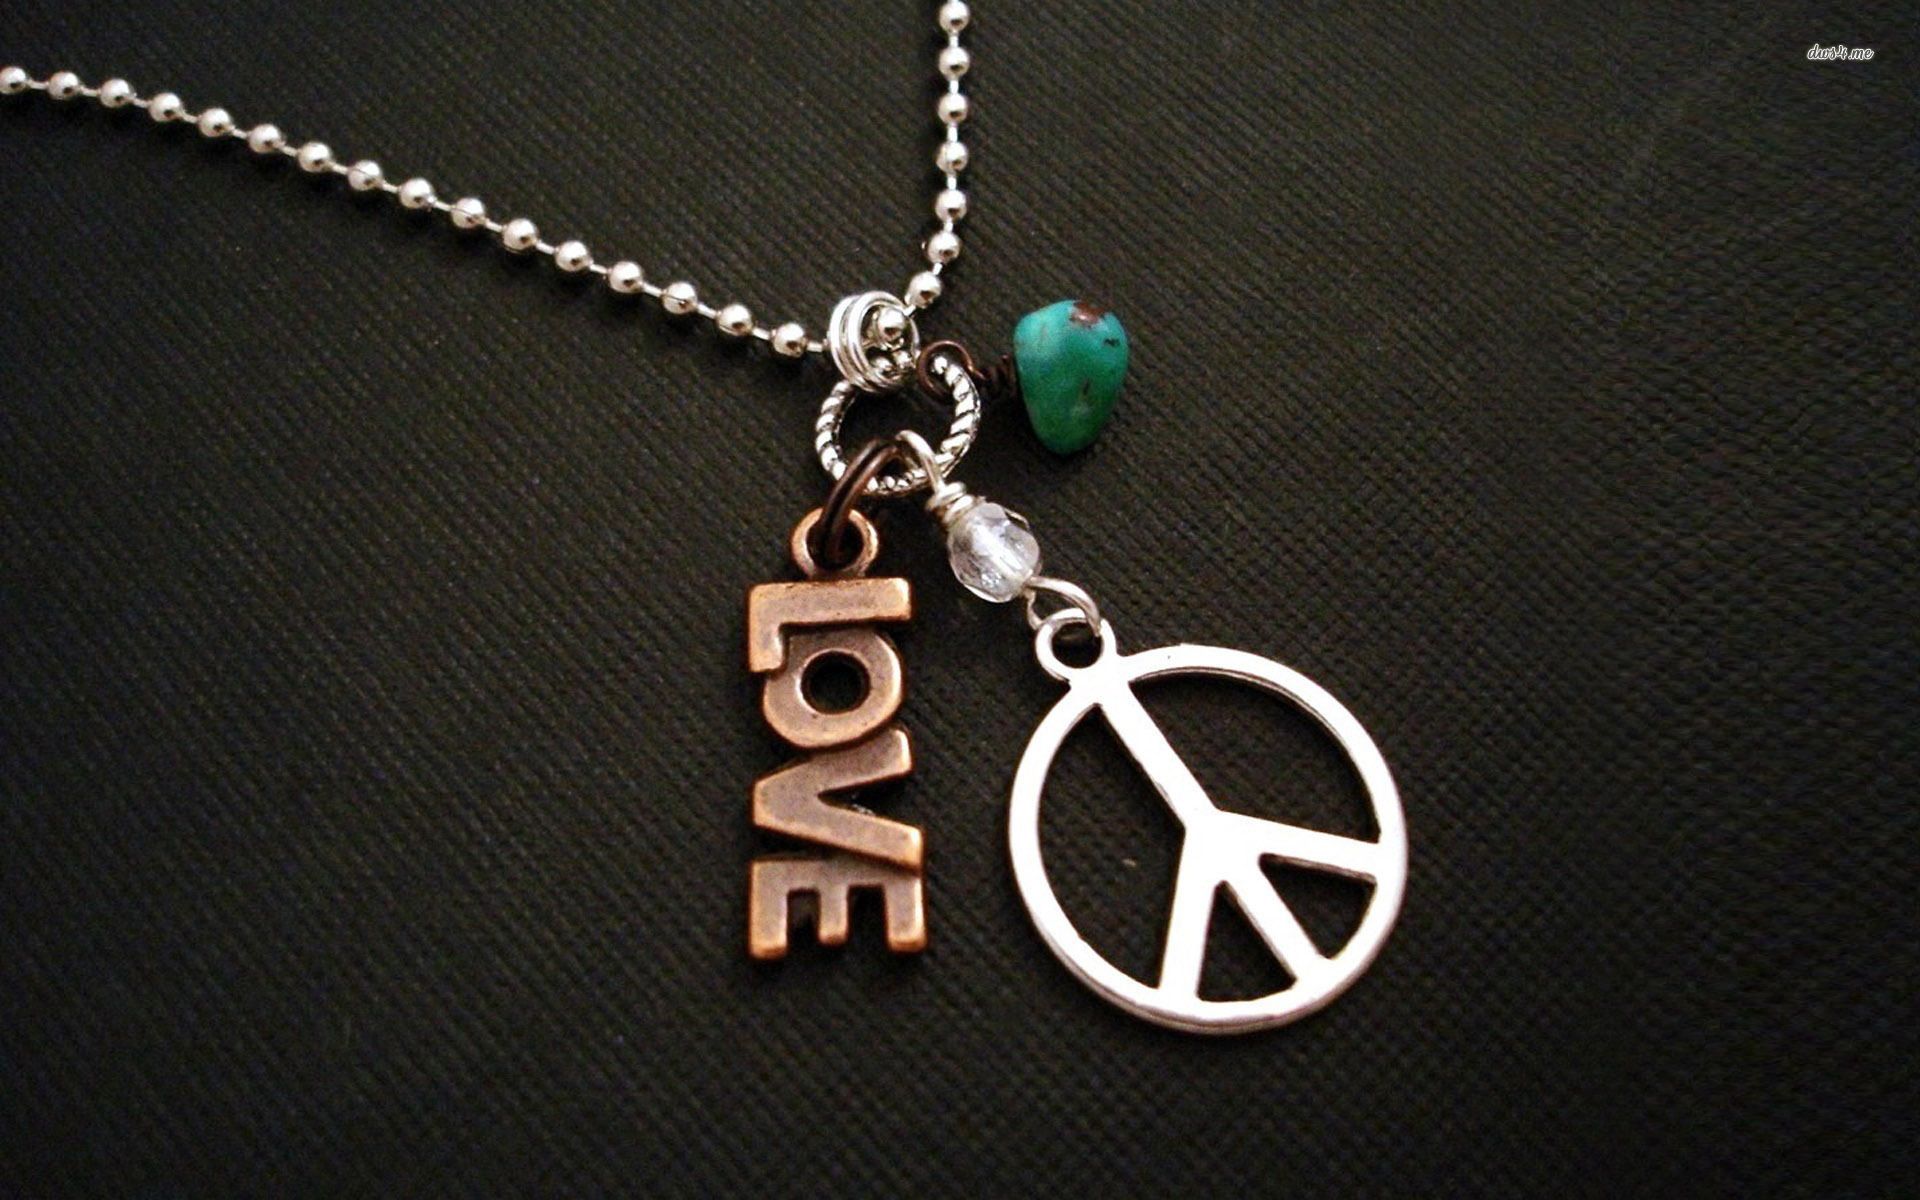 Love and Peace wallpaper - Photography wallpapers - #29388